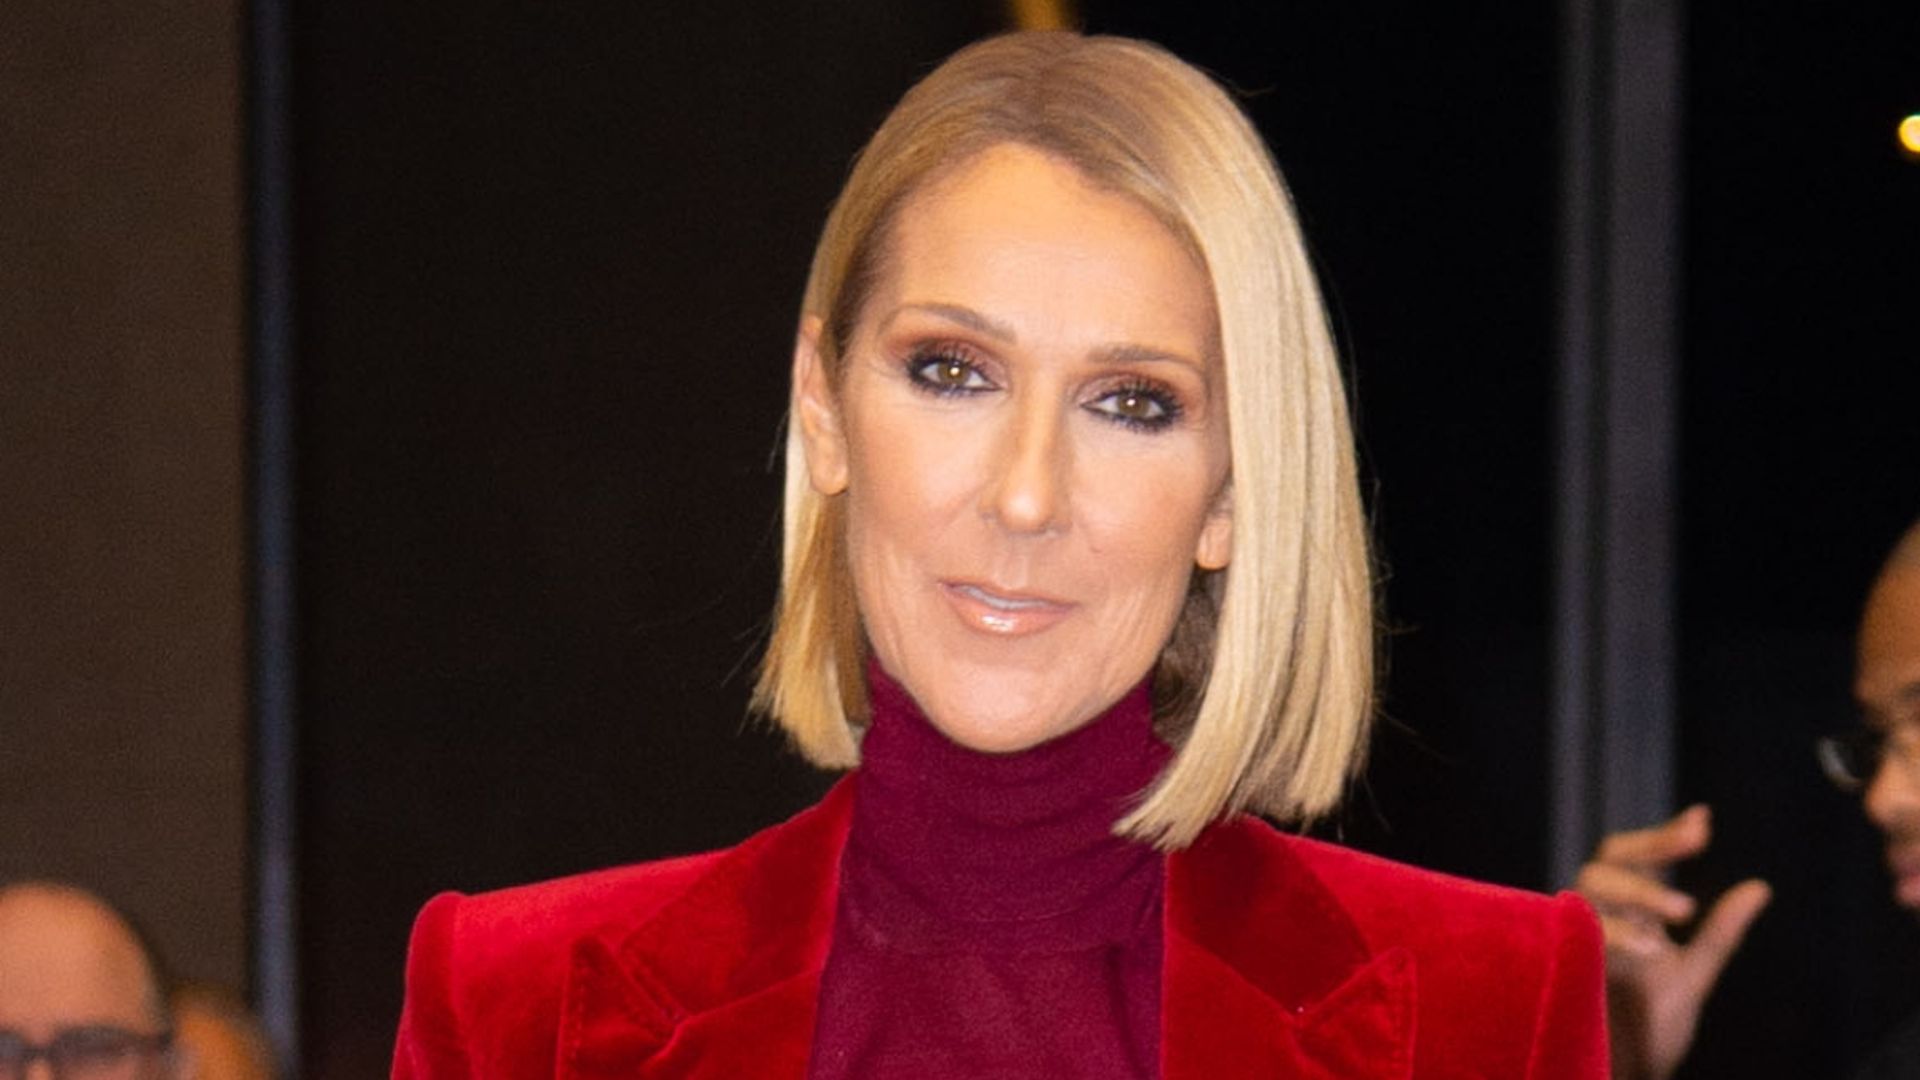 Celine Dion celebrates milestone family occasion with emotional post amid health battle